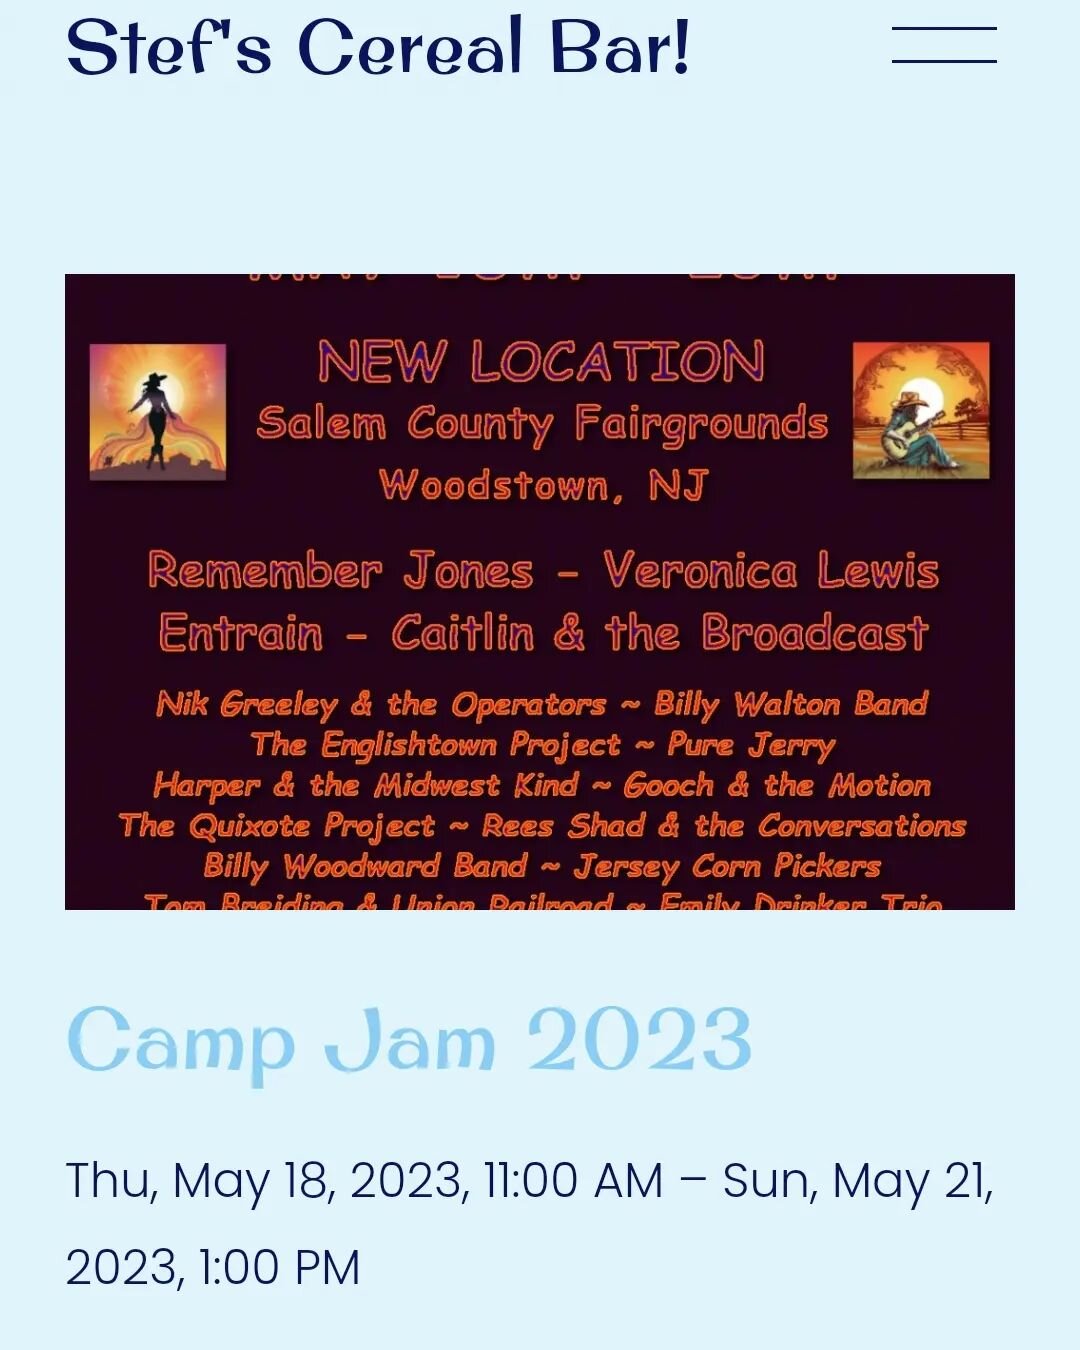 CAAAAMP JAAAAAM!!! Our favorite fest is this week!! Check out upcoming events on our website, looking for tickets? Click the link and you will be sent to Camp Jams website to get your tickets! Cant wait to see you there!!